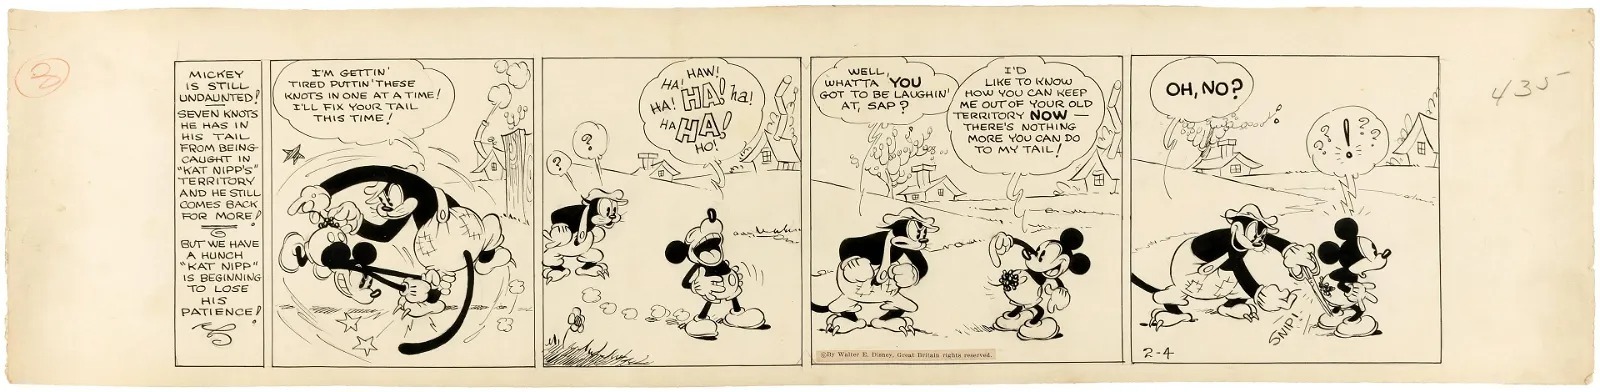 This original daily Mickey Mouse strip art for February 4, 1931, featuring pencil work by Floyd Gottfredson, achieved $52,313 plus the buyer’s premium in February 2021. Titled ‘A Sharp Retort’ on the back, the strip shocked many readers when Kat Nipp cut off Mickey’s tail. Image courtesy of Hake’s Auctions and LiveAuctioneers.